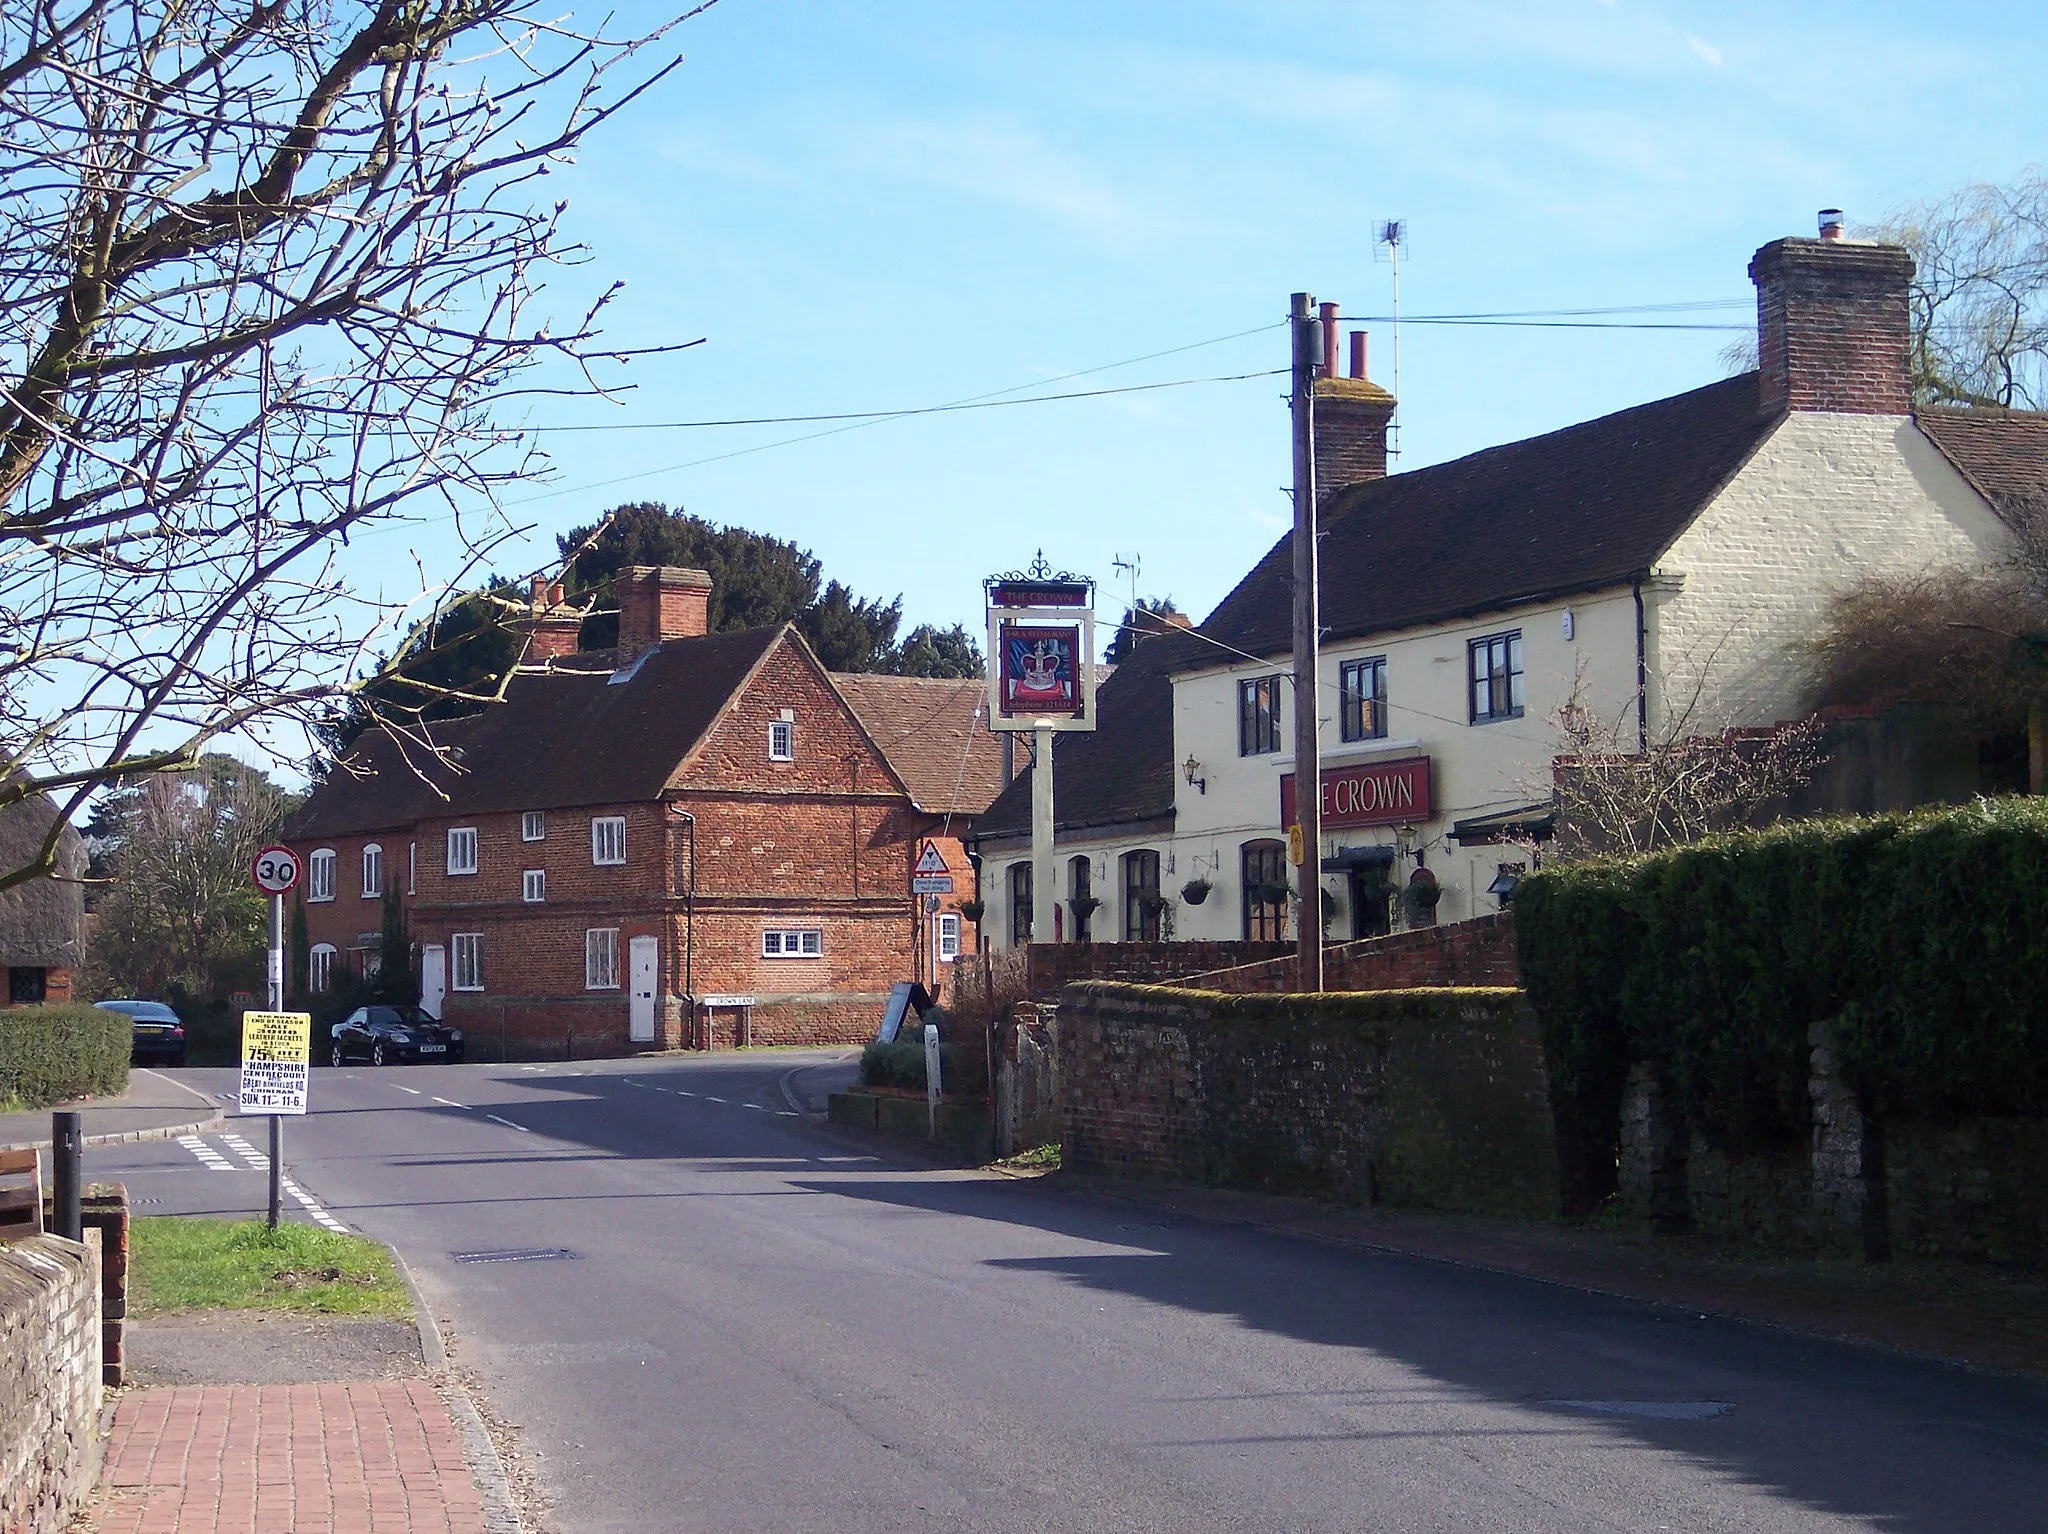 Photo showing: The crown Inn, The Street, Old Basing, Hampshire, England